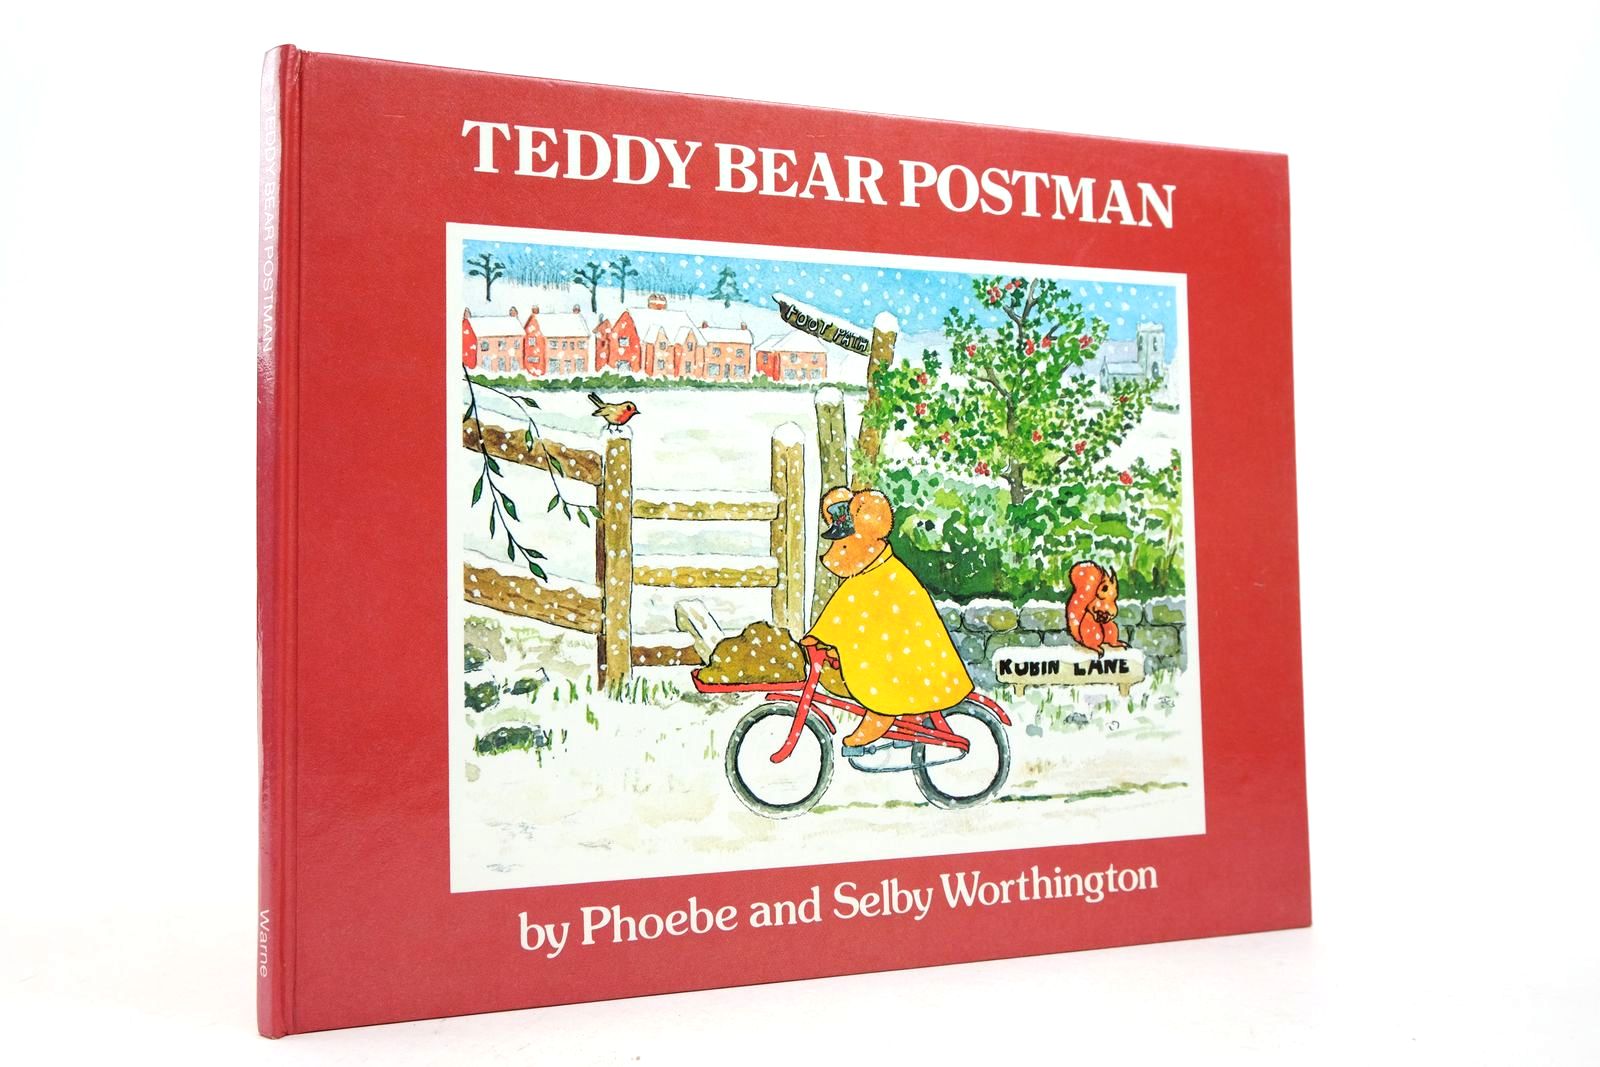 Photo of TEDDY BEAR POSTMAN written by Worthington, Phoebe
Worthington, Selby published by Frederick Warne & Co Ltd. (STOCK CODE: 2140508)  for sale by Stella & Rose's Books